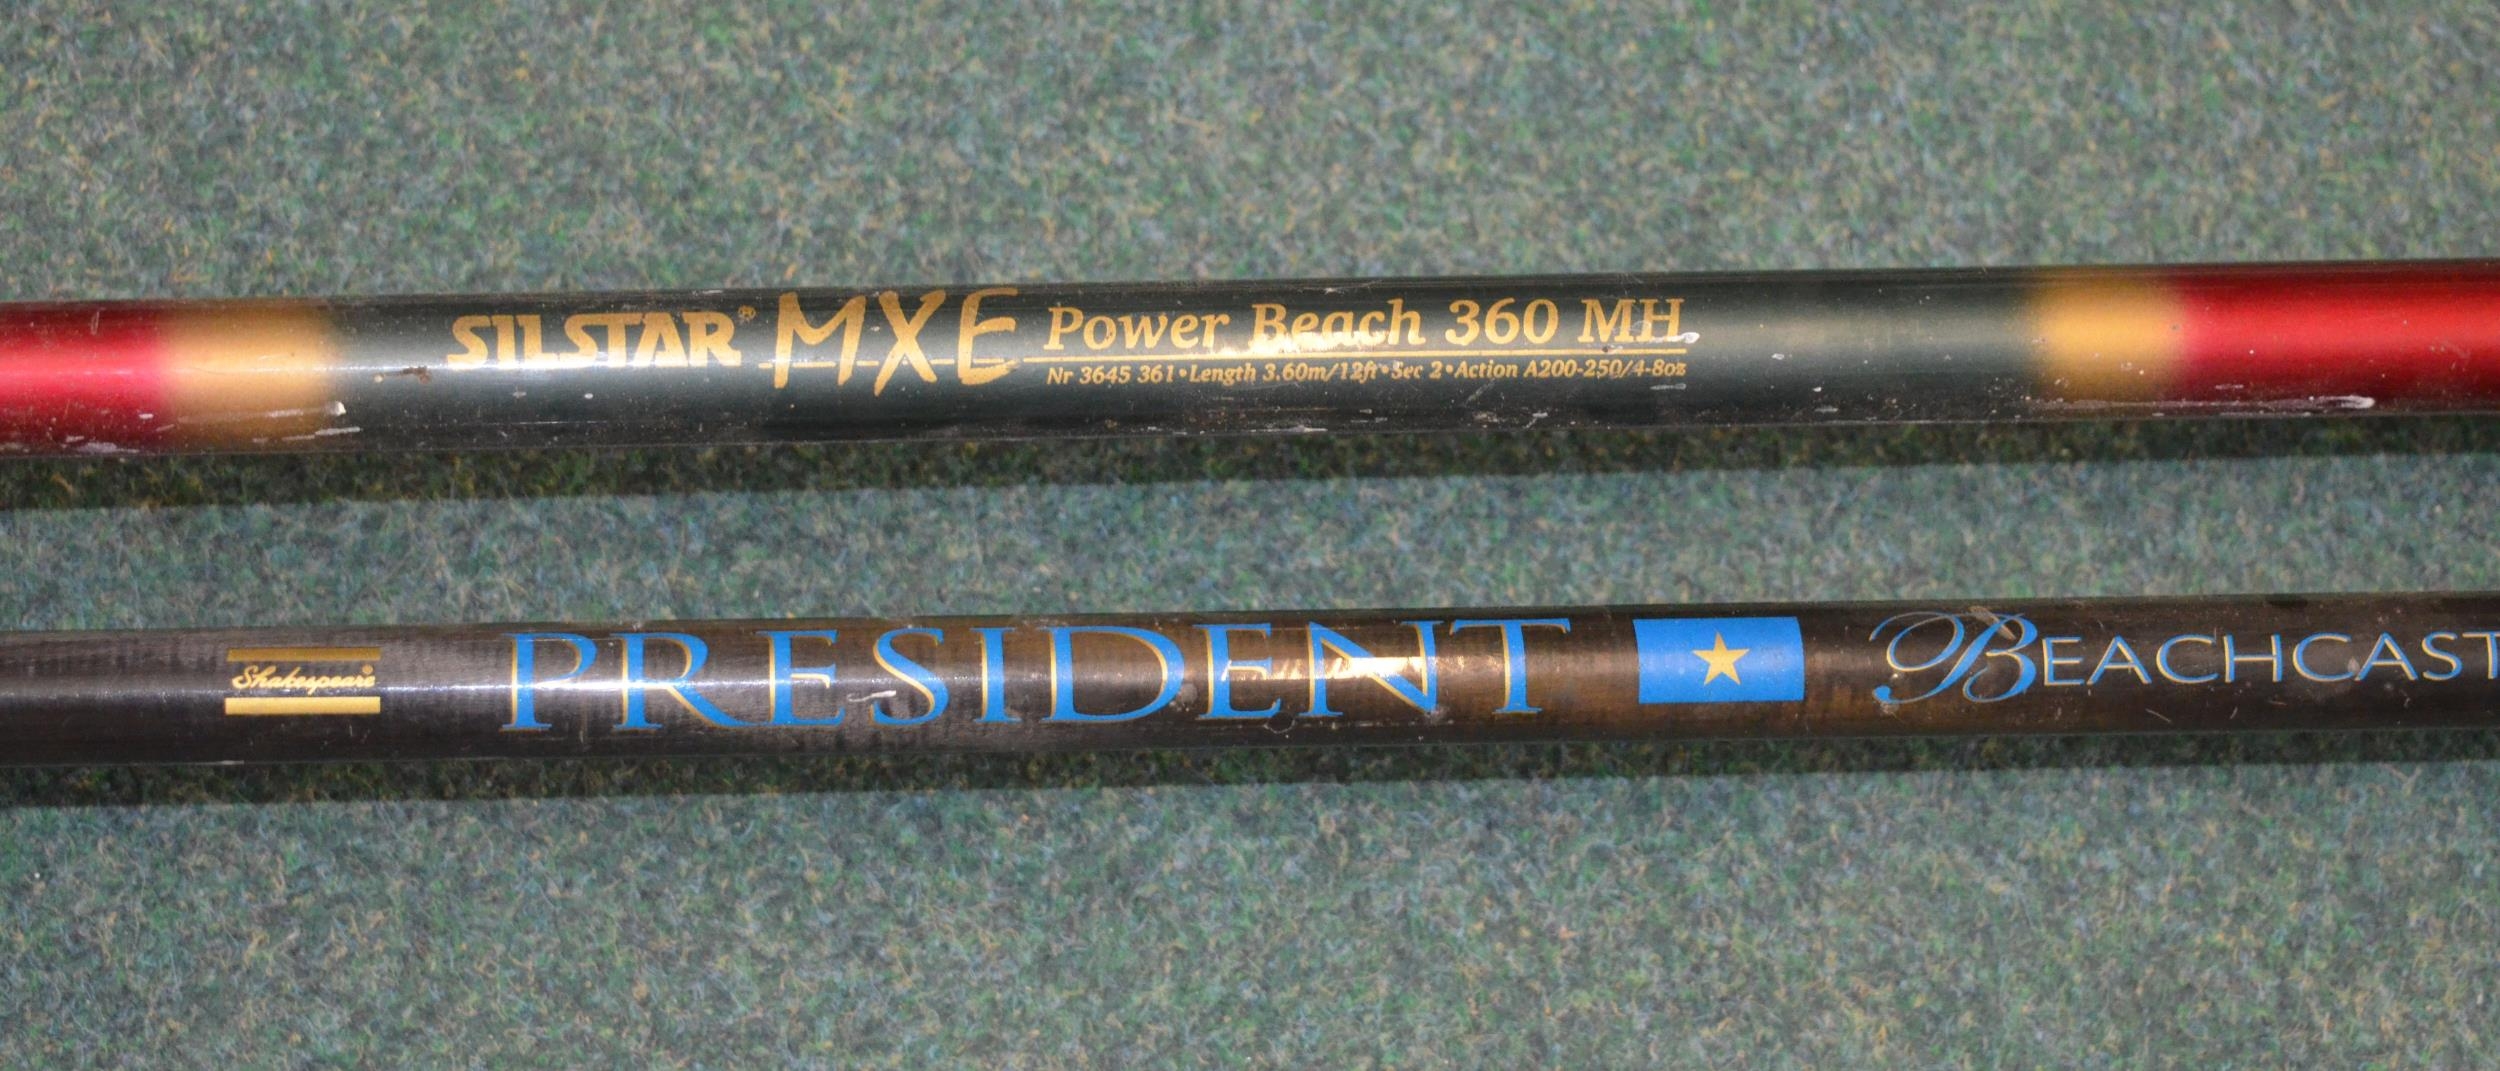 2 6ft boat rods by Master Line, 2 Beachcasters, 1 by Shakespeare L3.6m 2 piece, a Sil Star MXE Power - Image 5 of 6